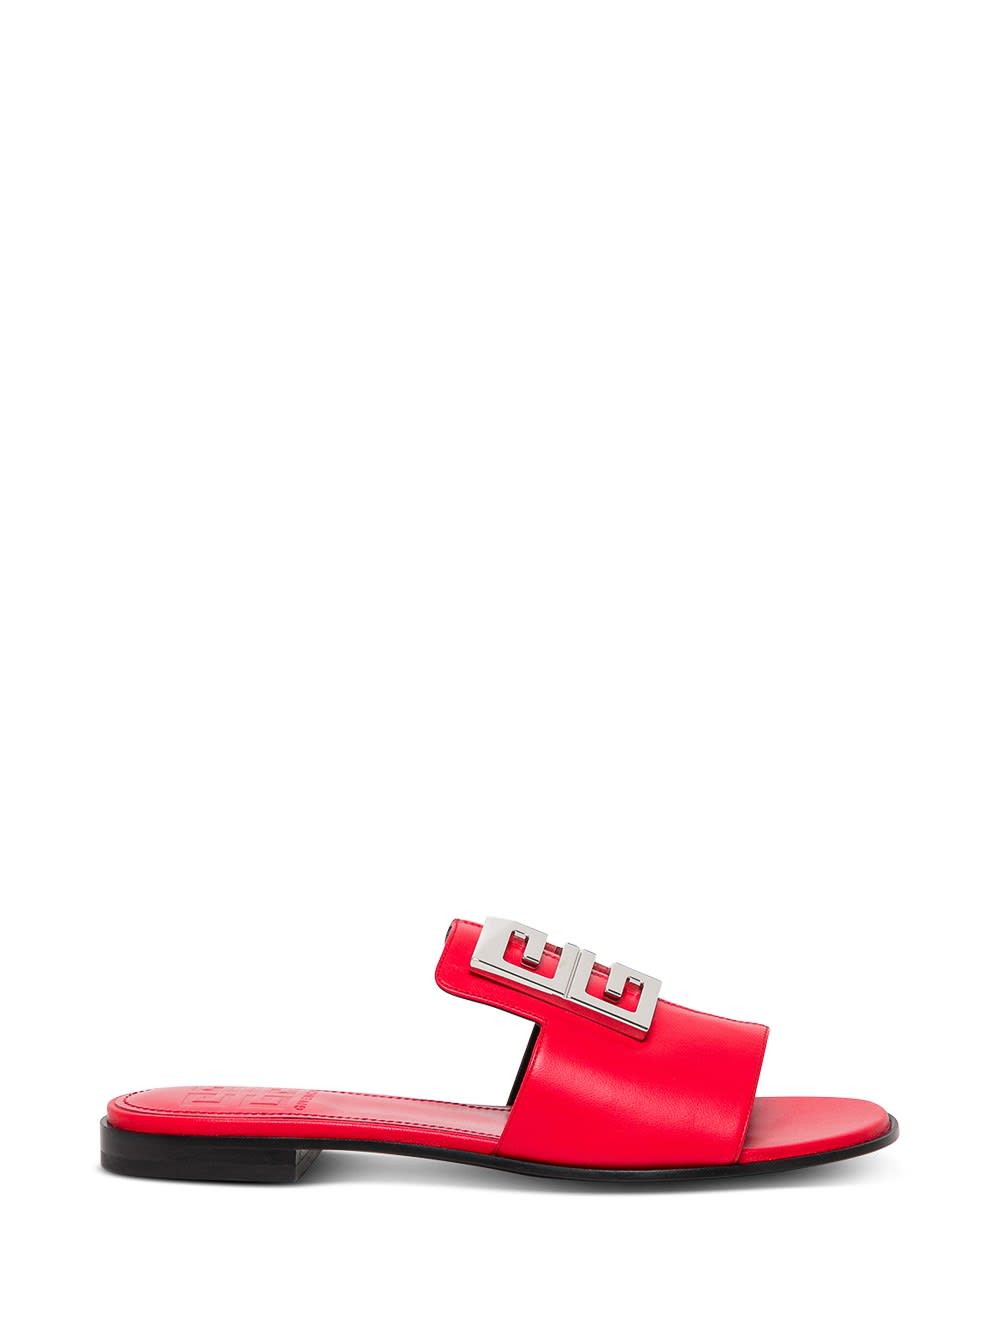 Givenchy 4g Flat Sandals In Red Leather | italist, ALWAYS LIKE A SALE